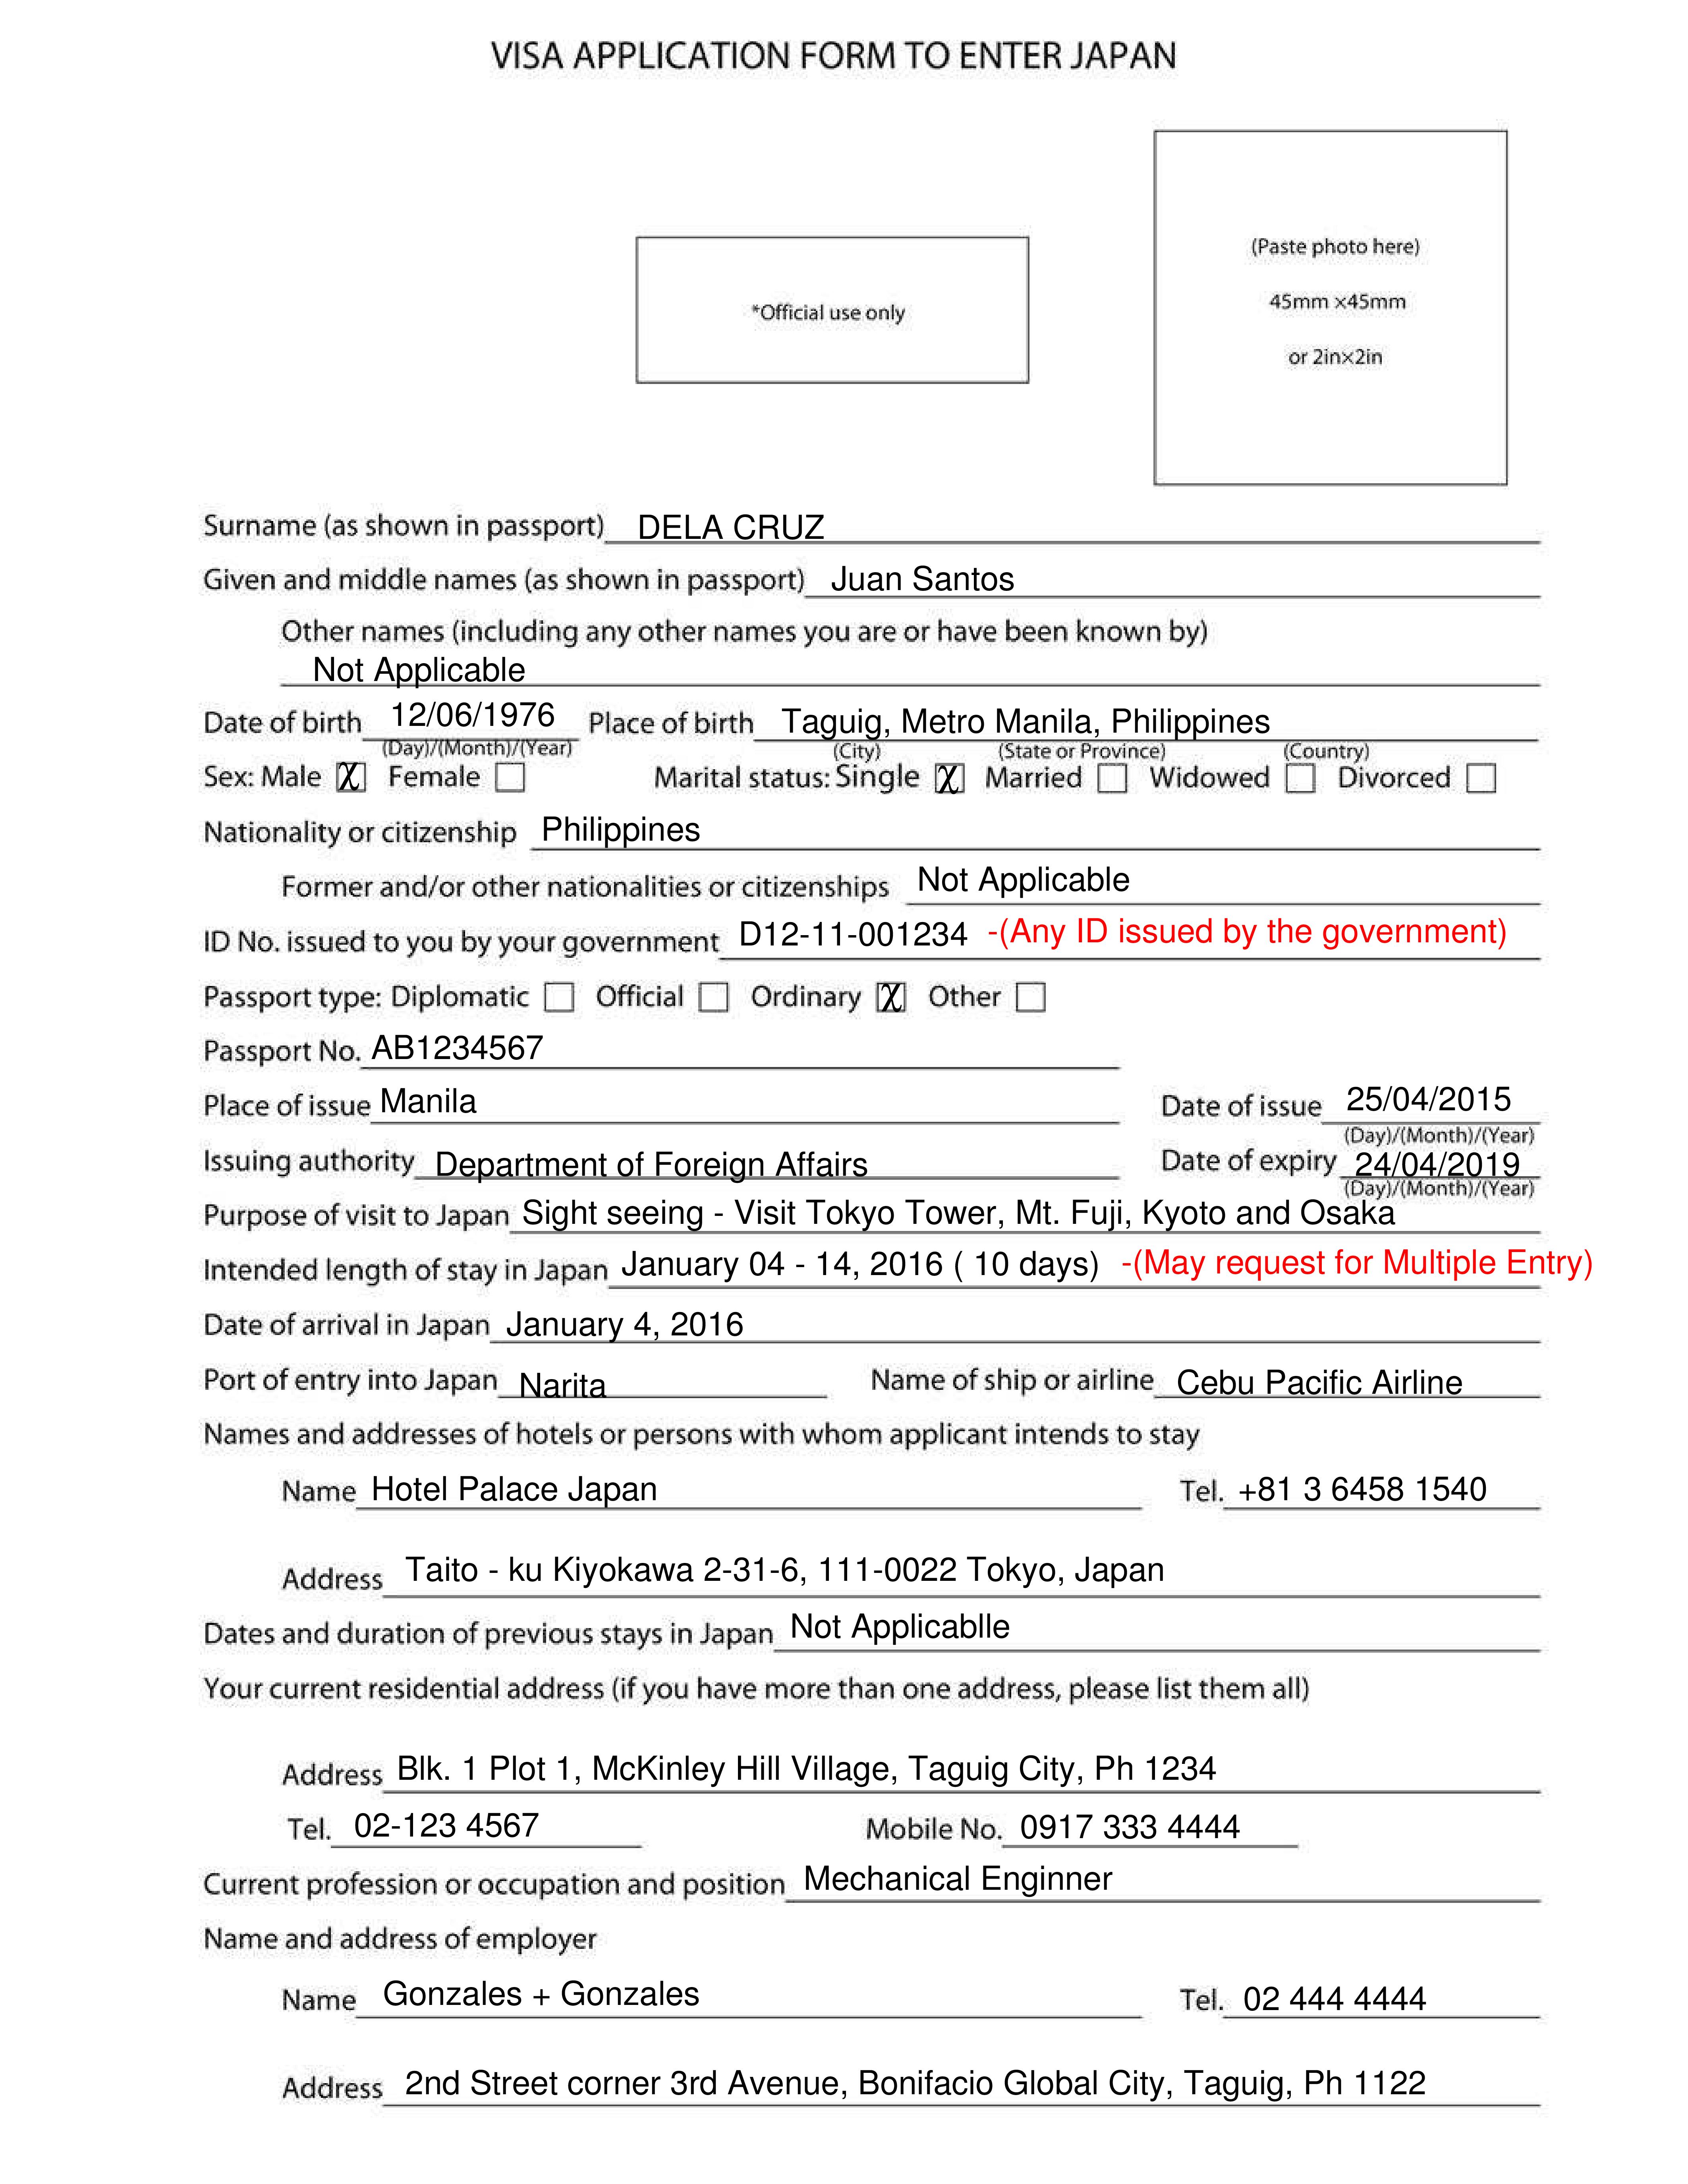 form visa sample japan out How to fill with No Application Visa Japan Form